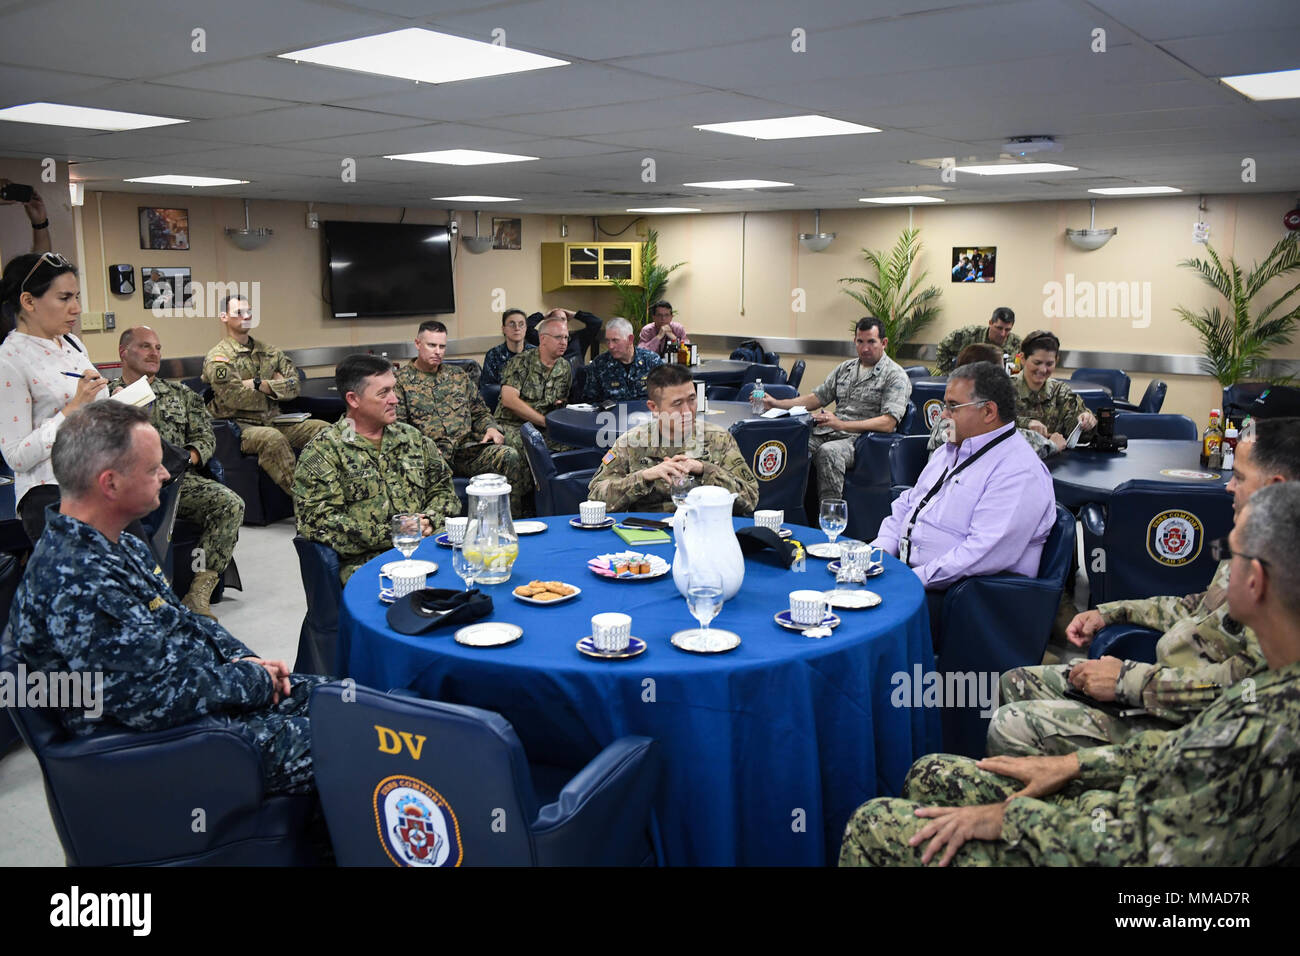 171004-N-ZN152-0026 SAN JUAN, Puerto Rico (Oct. 4, 2017) - Brig. Gen. Rich Kim, Army North's deputy commander (center), discusses the capabilities of the Military Sealift Command hospital ship USNS Comfort (T-AH 20) with Capt. Kevin Robinson, Comfort's mission commander (left), Capt. Kevin Buckley, commanding officer, Comfort's medical treatment facility (far left),  Dr. Rafael Rodriguez Mercado, Puerto Rico Secretary of Health, and other local and federal stakeholders while the ship is in Puerto Rico to synchronize efforts for providing humanitarian assistance throughout the area. The Departm Stock Photo